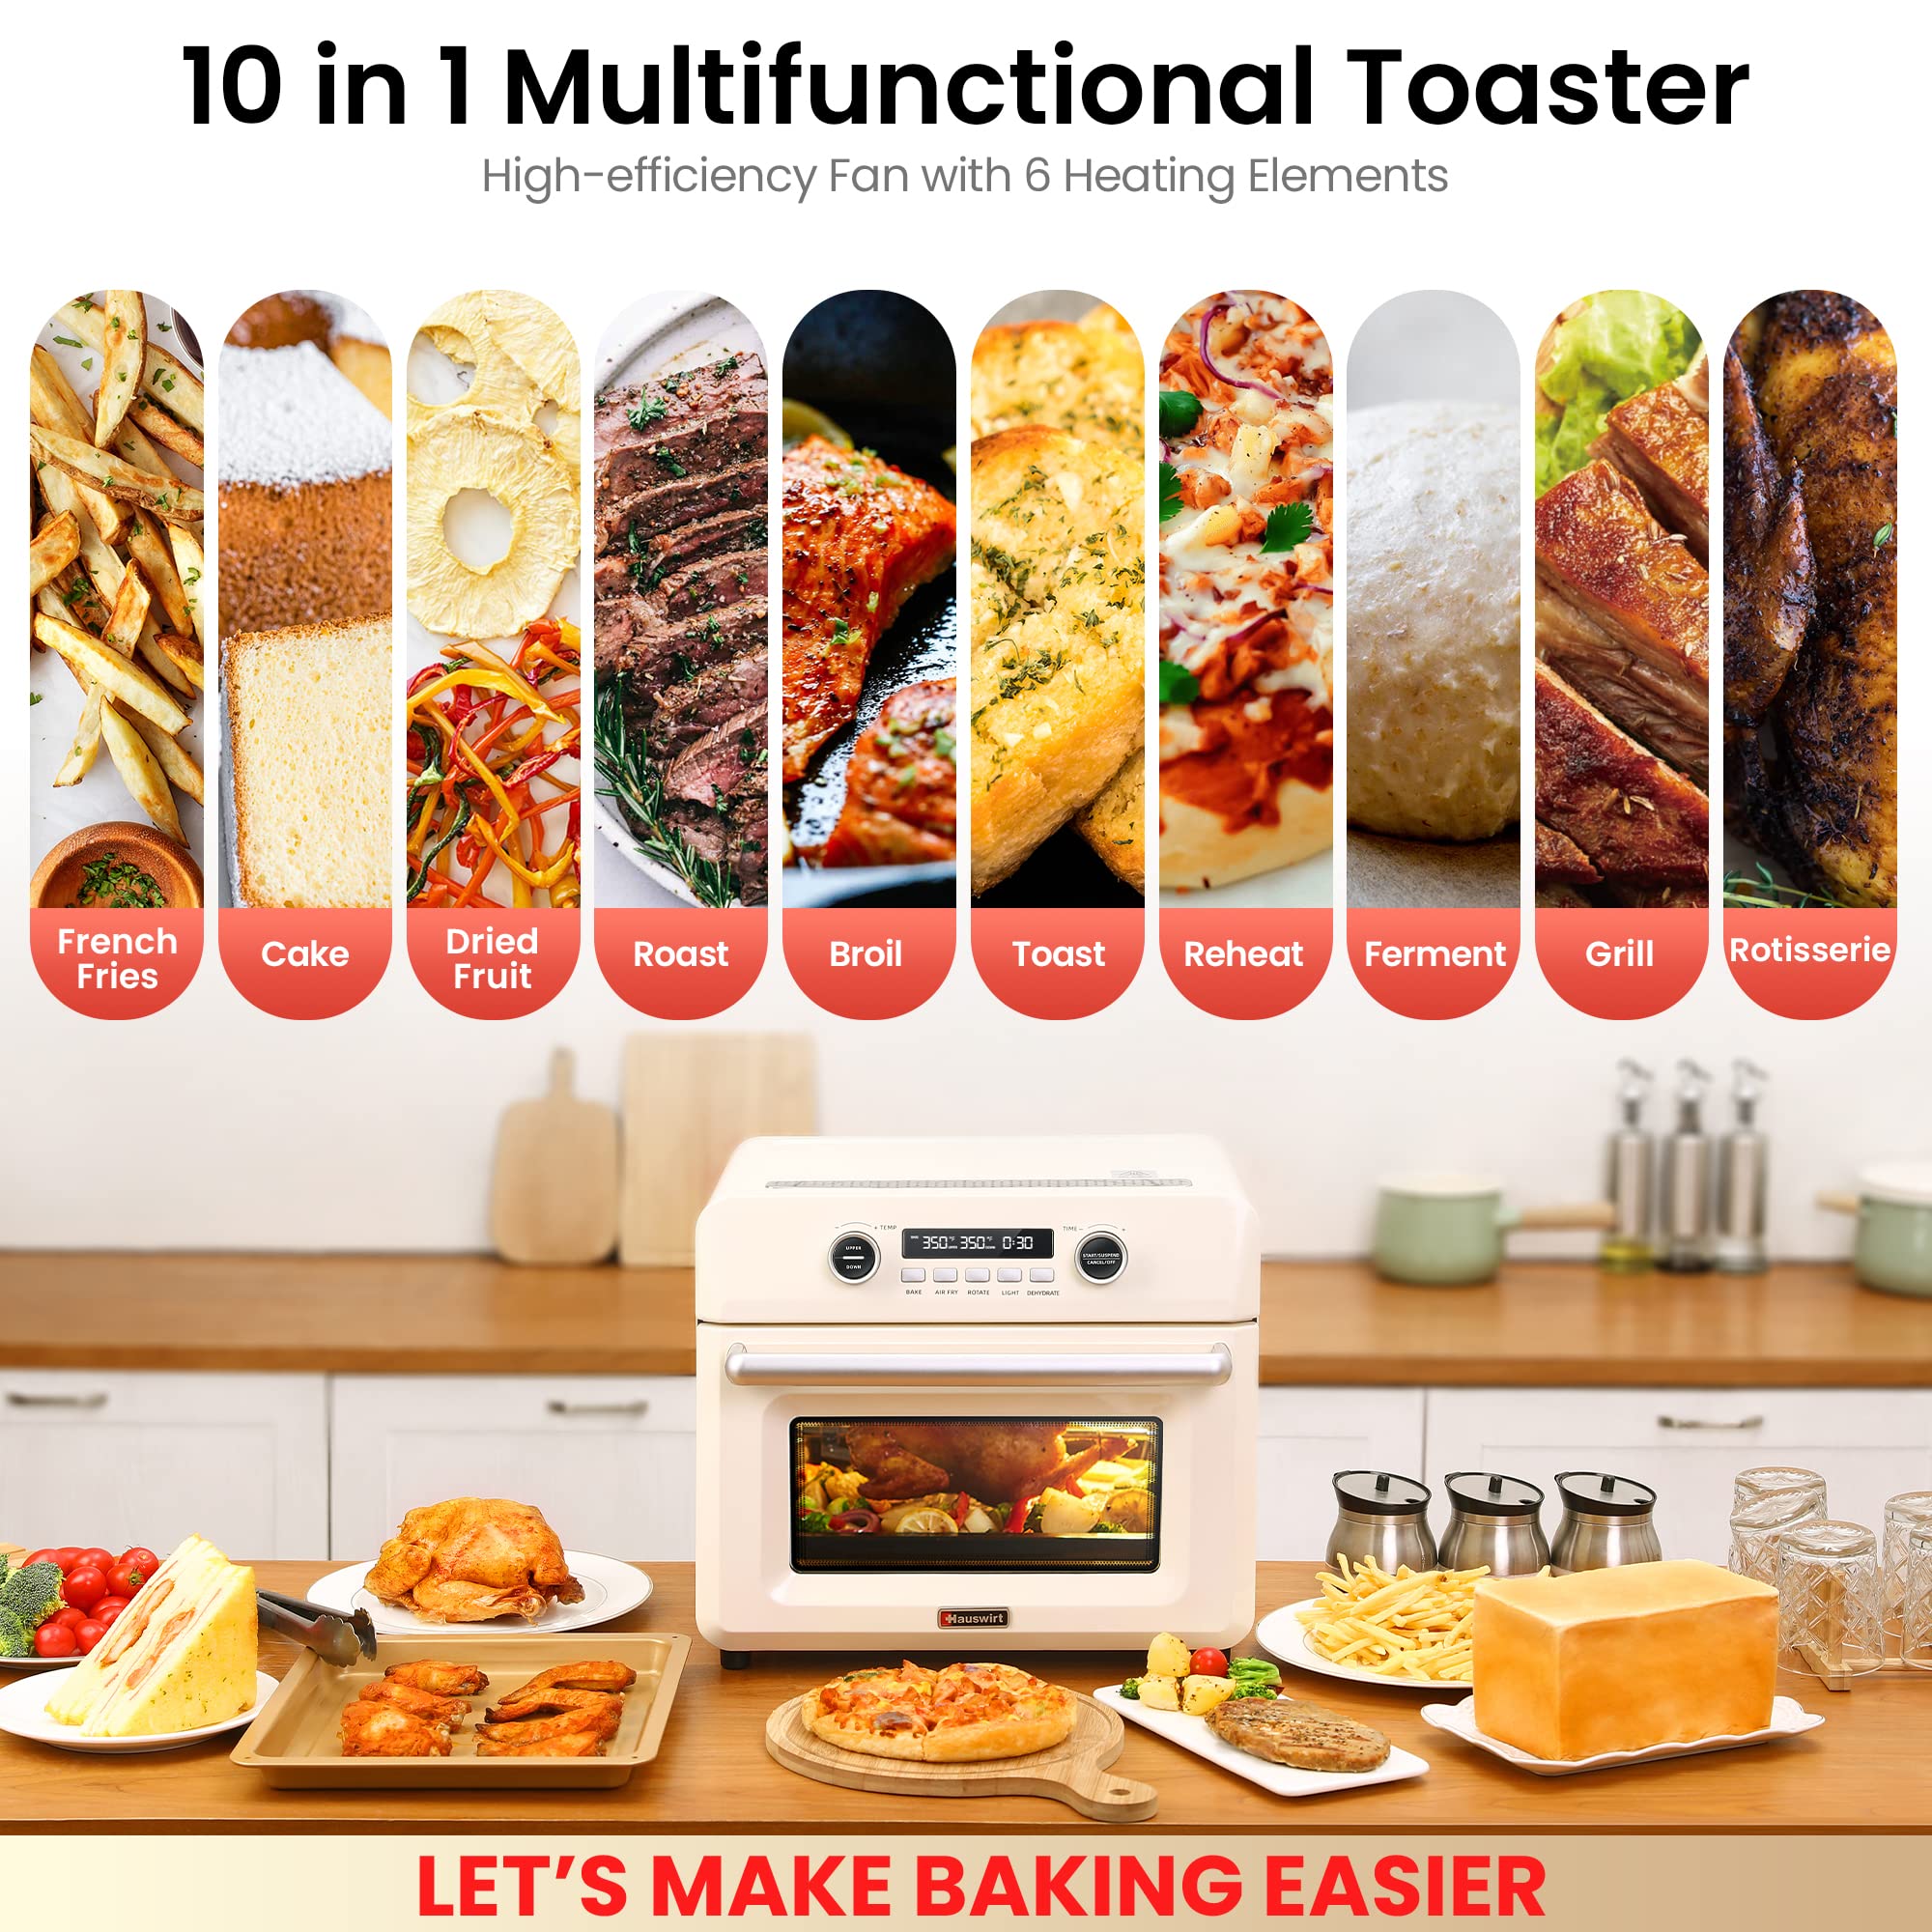 Hauswirt 26.5 QT/25 L Extra Large Smart Air Fryer Toaster Oven, 10-in-1 Stainless Steel Convection Countertop Oven Combination with Dehydrator, E-recipes & Accessories Included (Elegant Retro White-LCD)